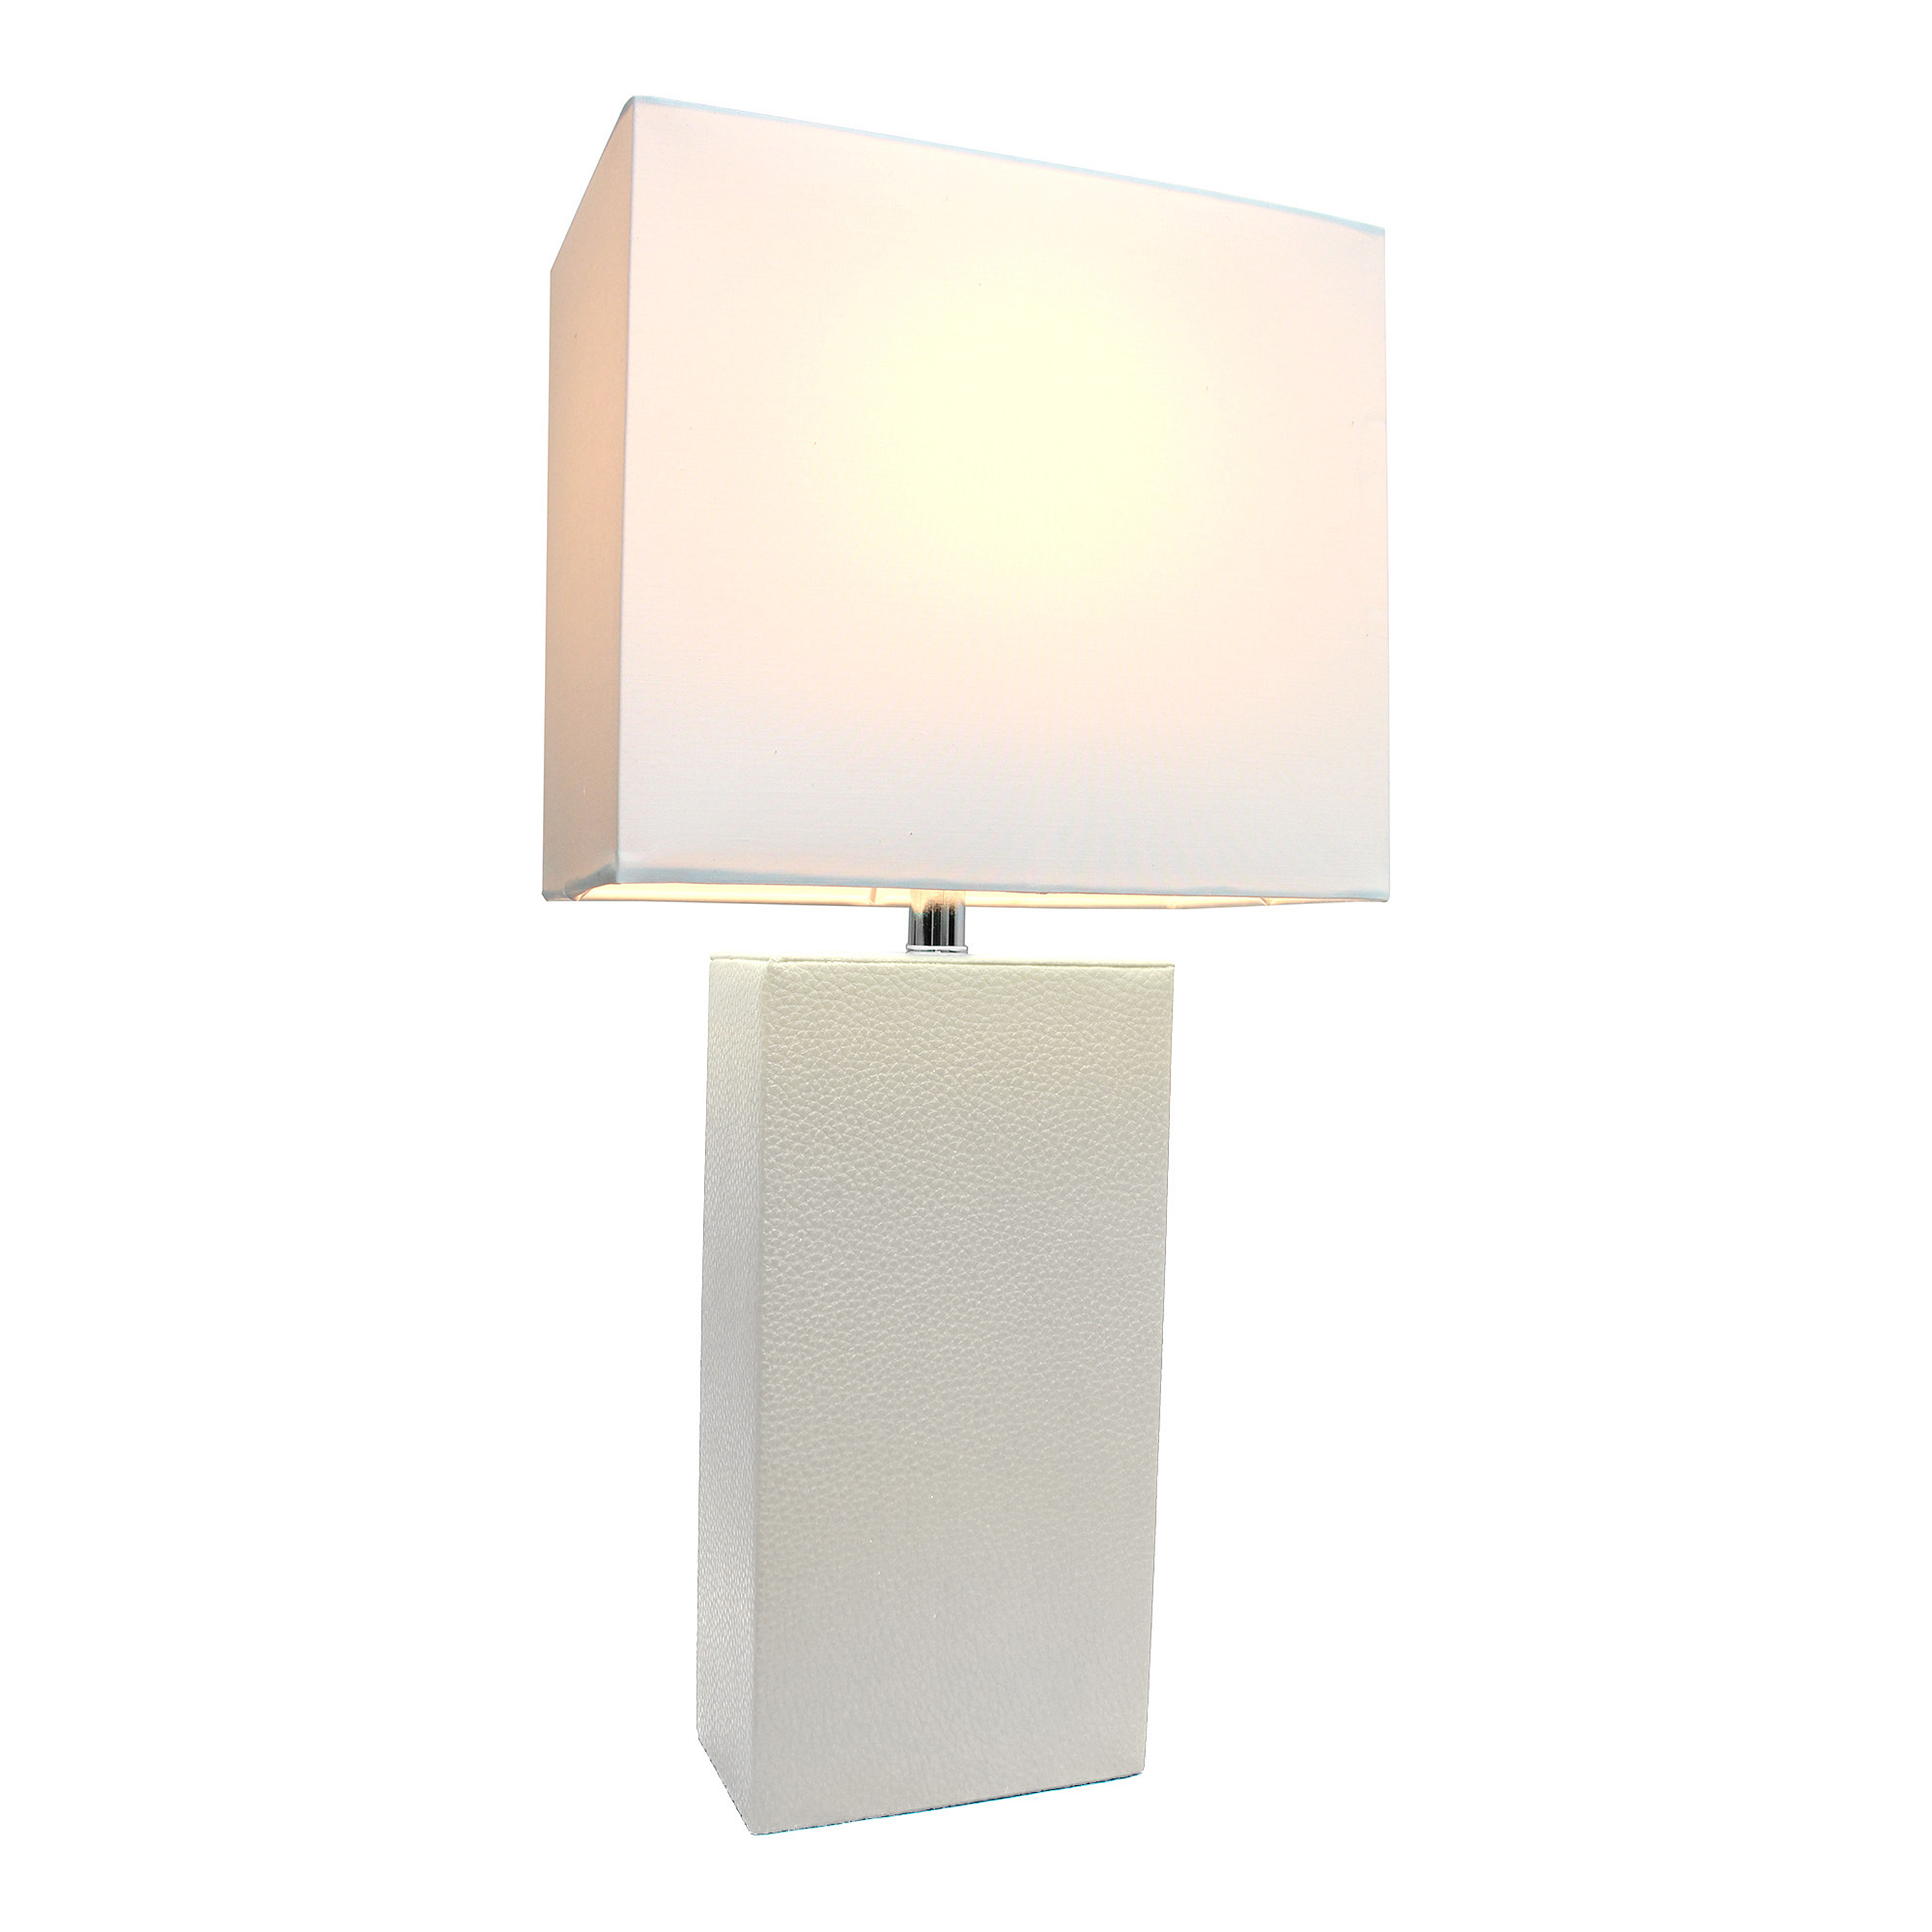 Elegant Designs Modern Leather Table Lamp with White Fabric Shade ...